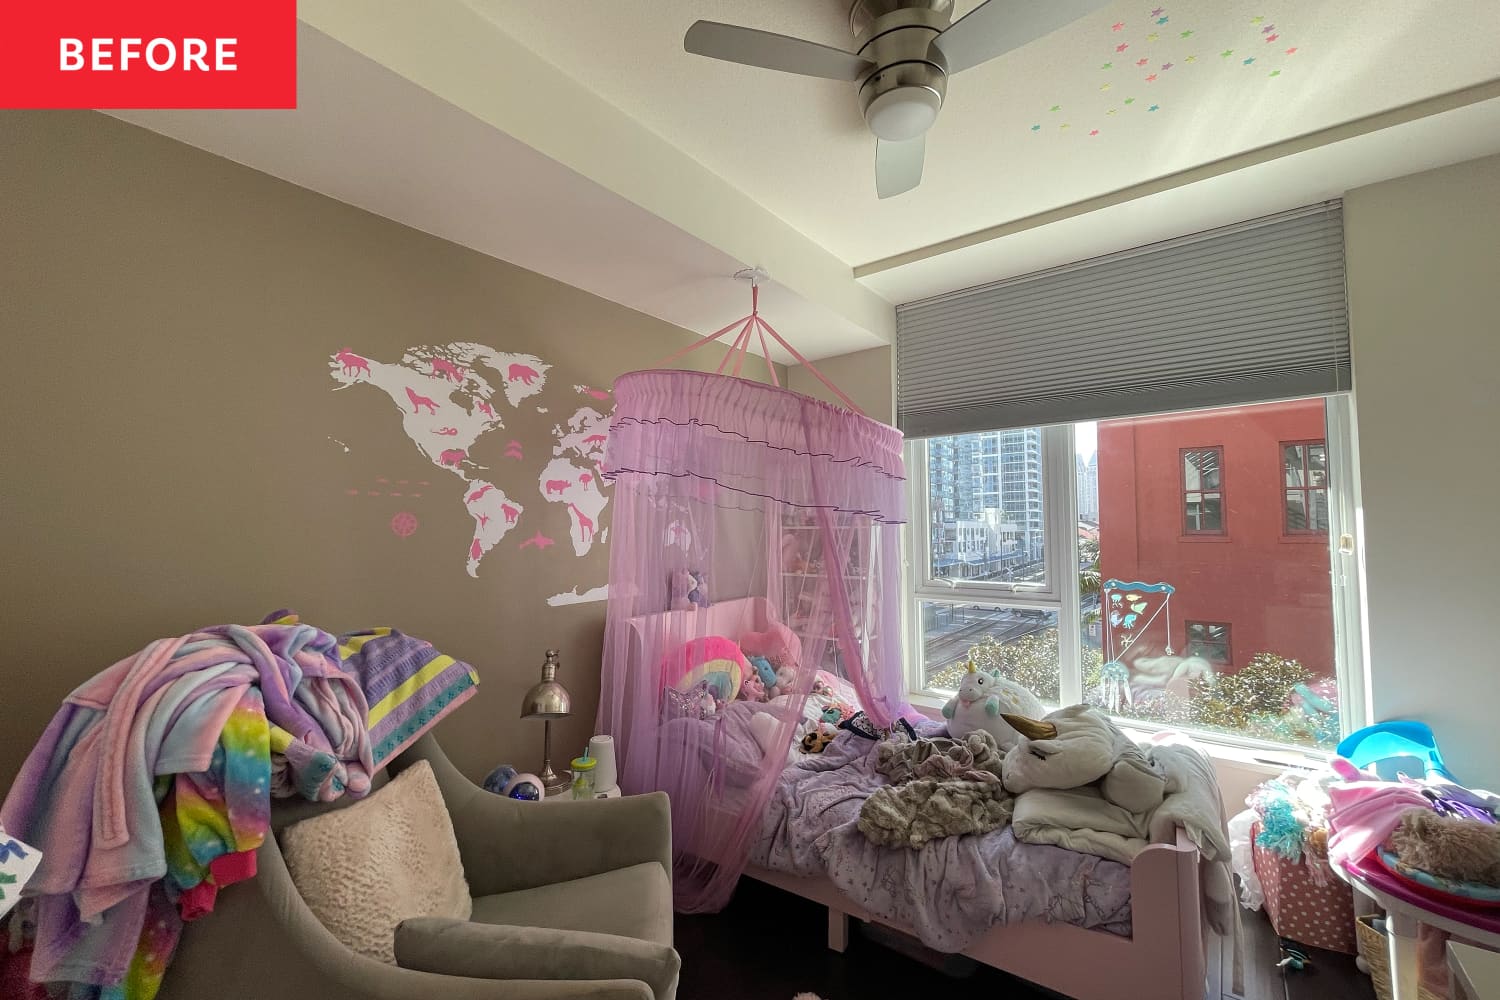 Before and After: A Built-In Loft Doubles the Space in a Tiny Kids’ Room with Sweet Touches